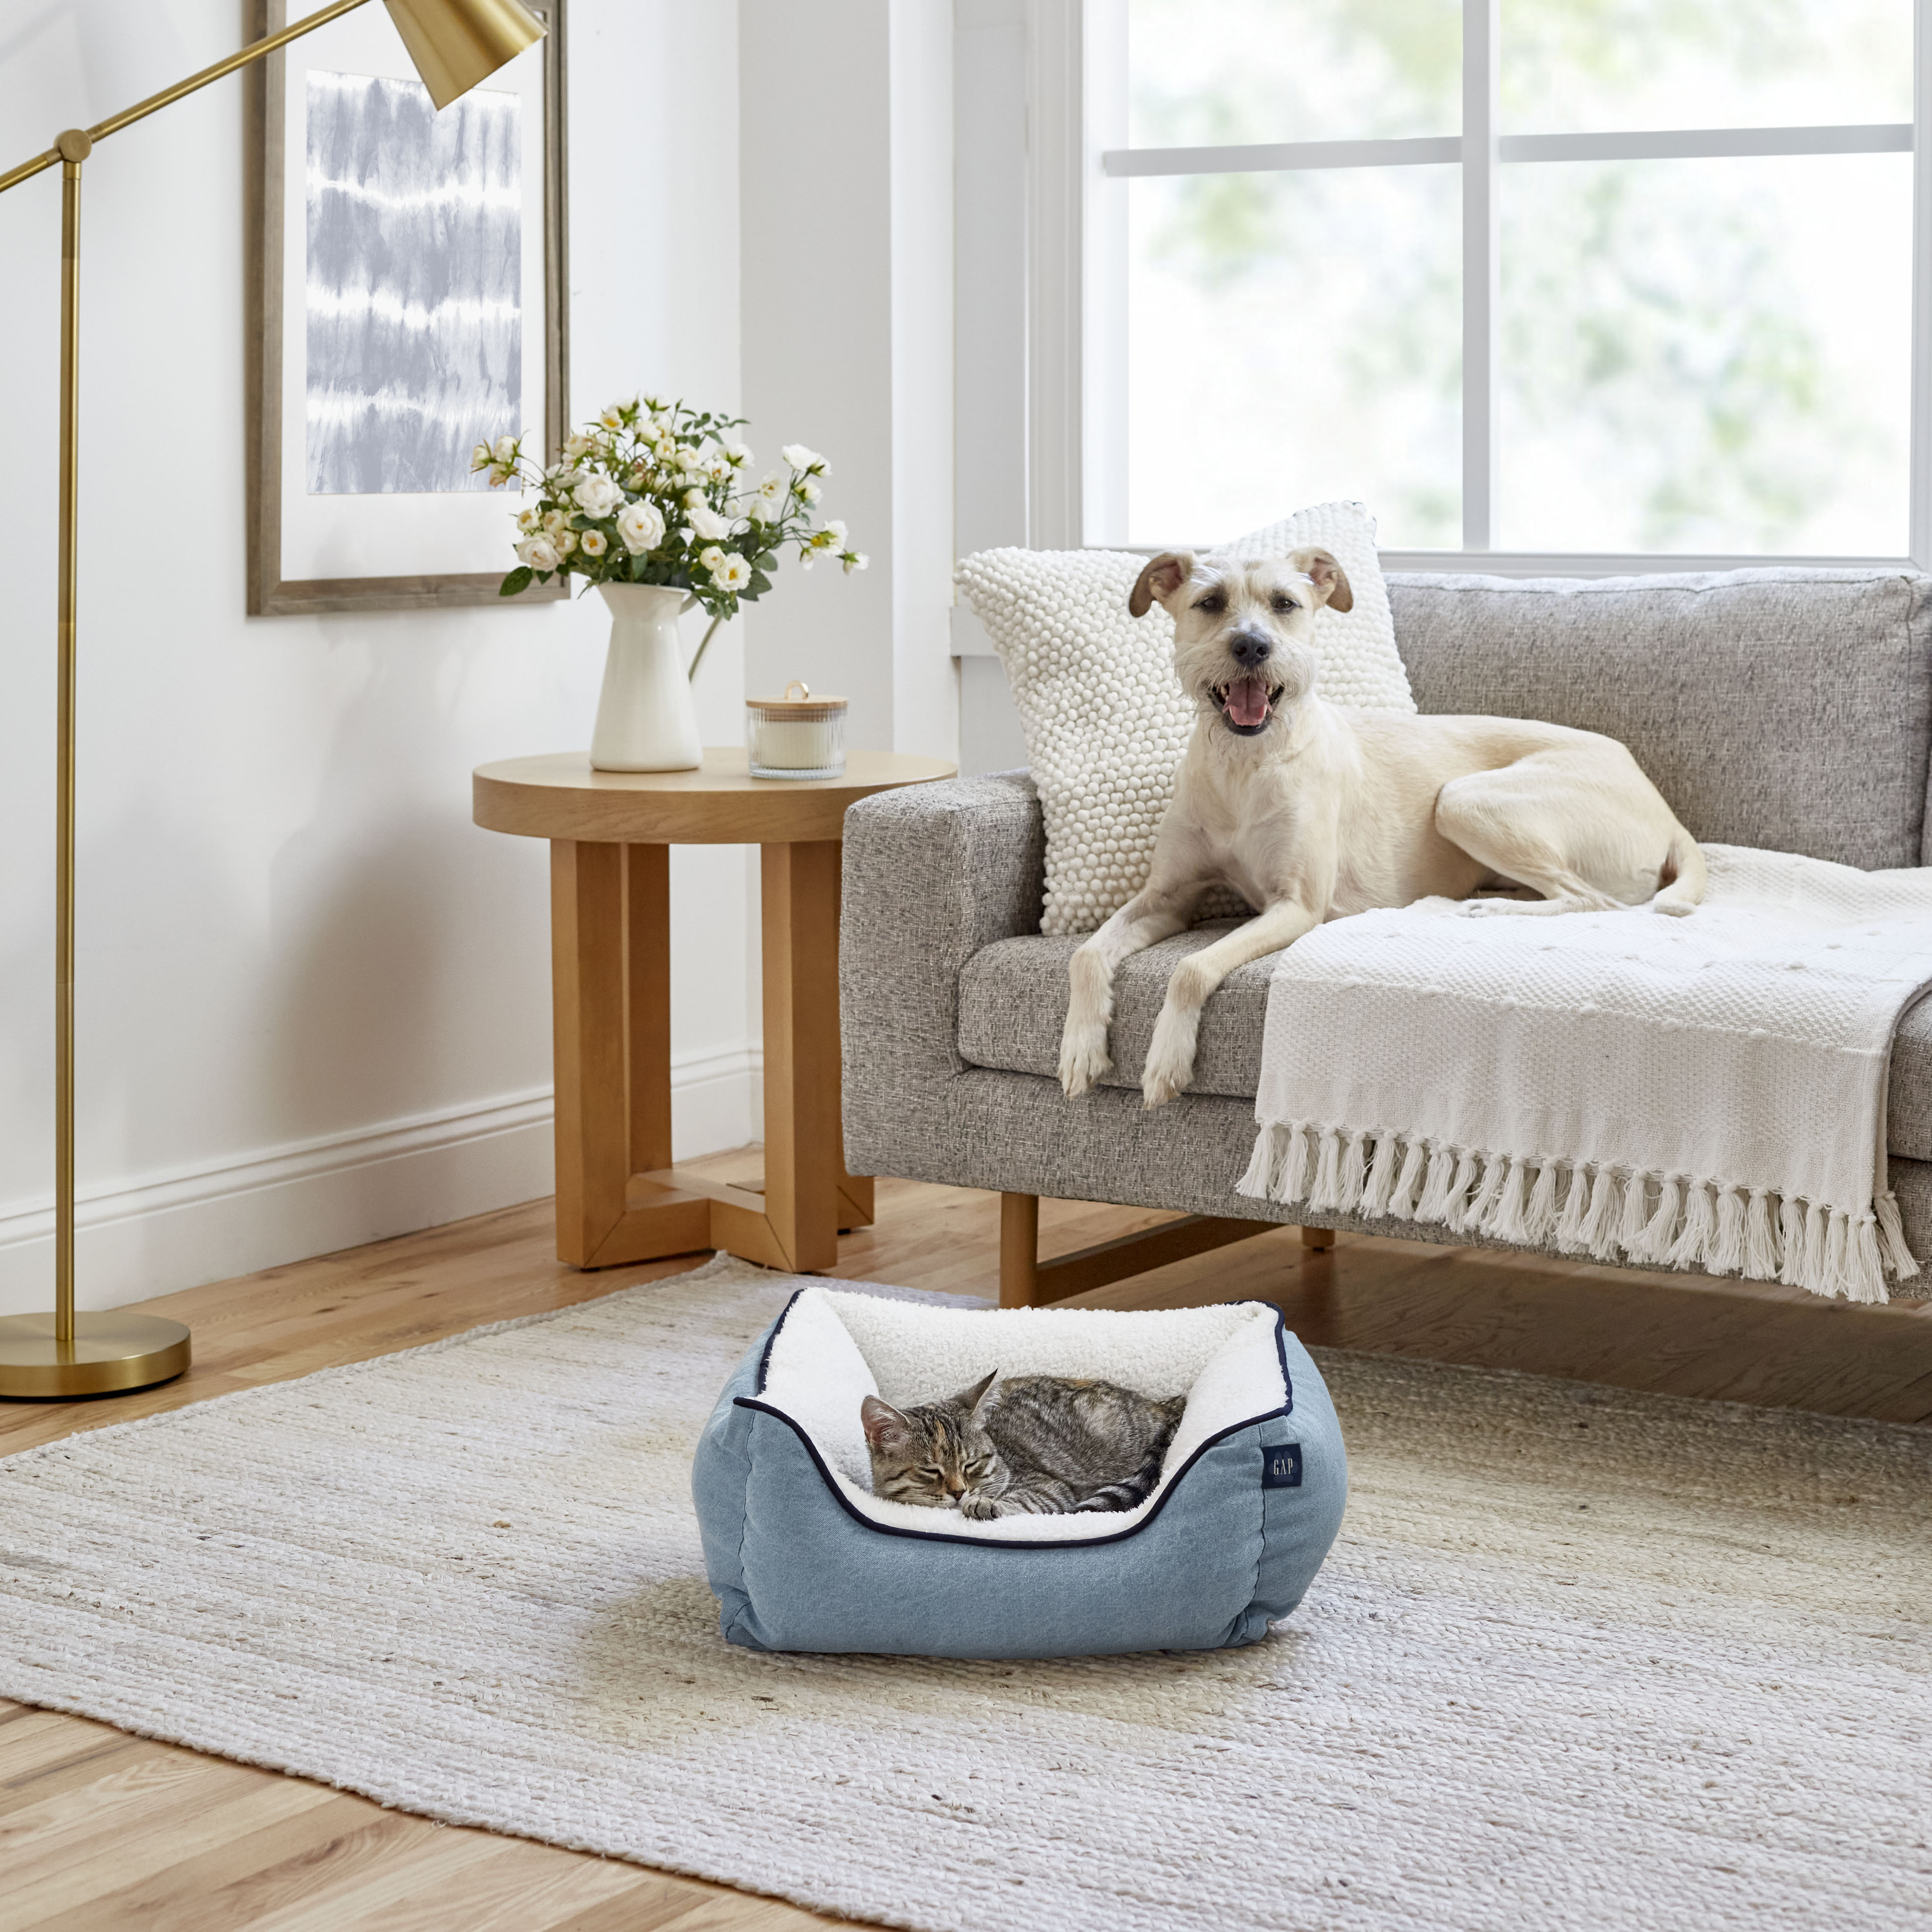 Small Light Blue Denim Pet Bed with Sherpa